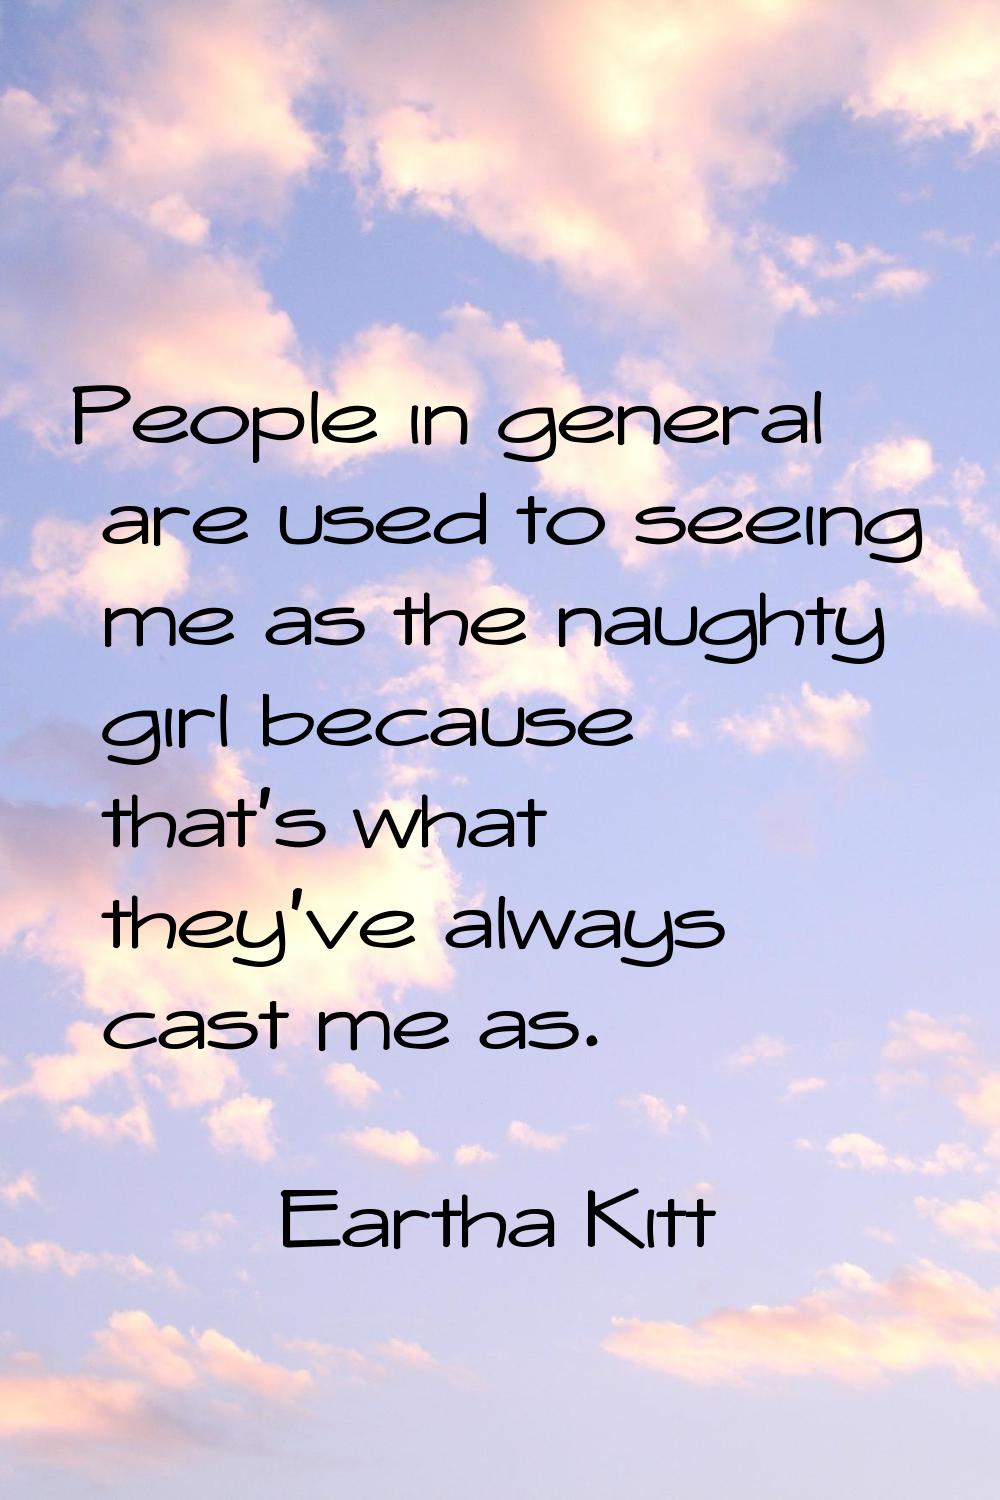 People in general are used to seeing me as the naughty girl because that's what they've always cast